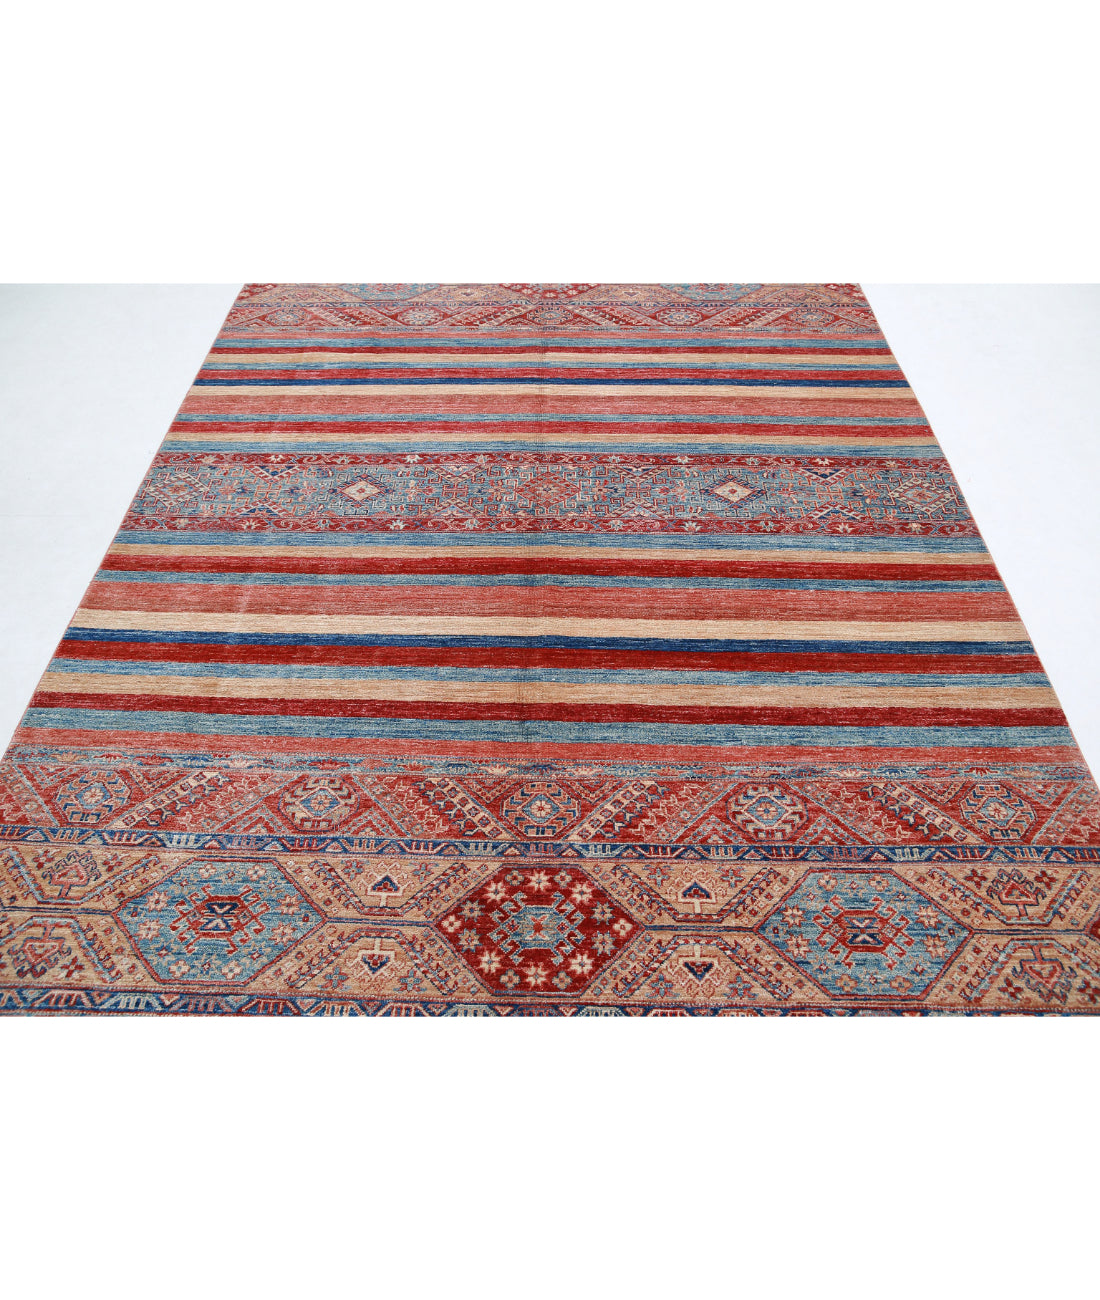 Hand Knotted Khurjeen Wool Rug - 6'7'' x 9'8'' 6'7'' x 9'8'' (198 X 290) / Multi / Multi